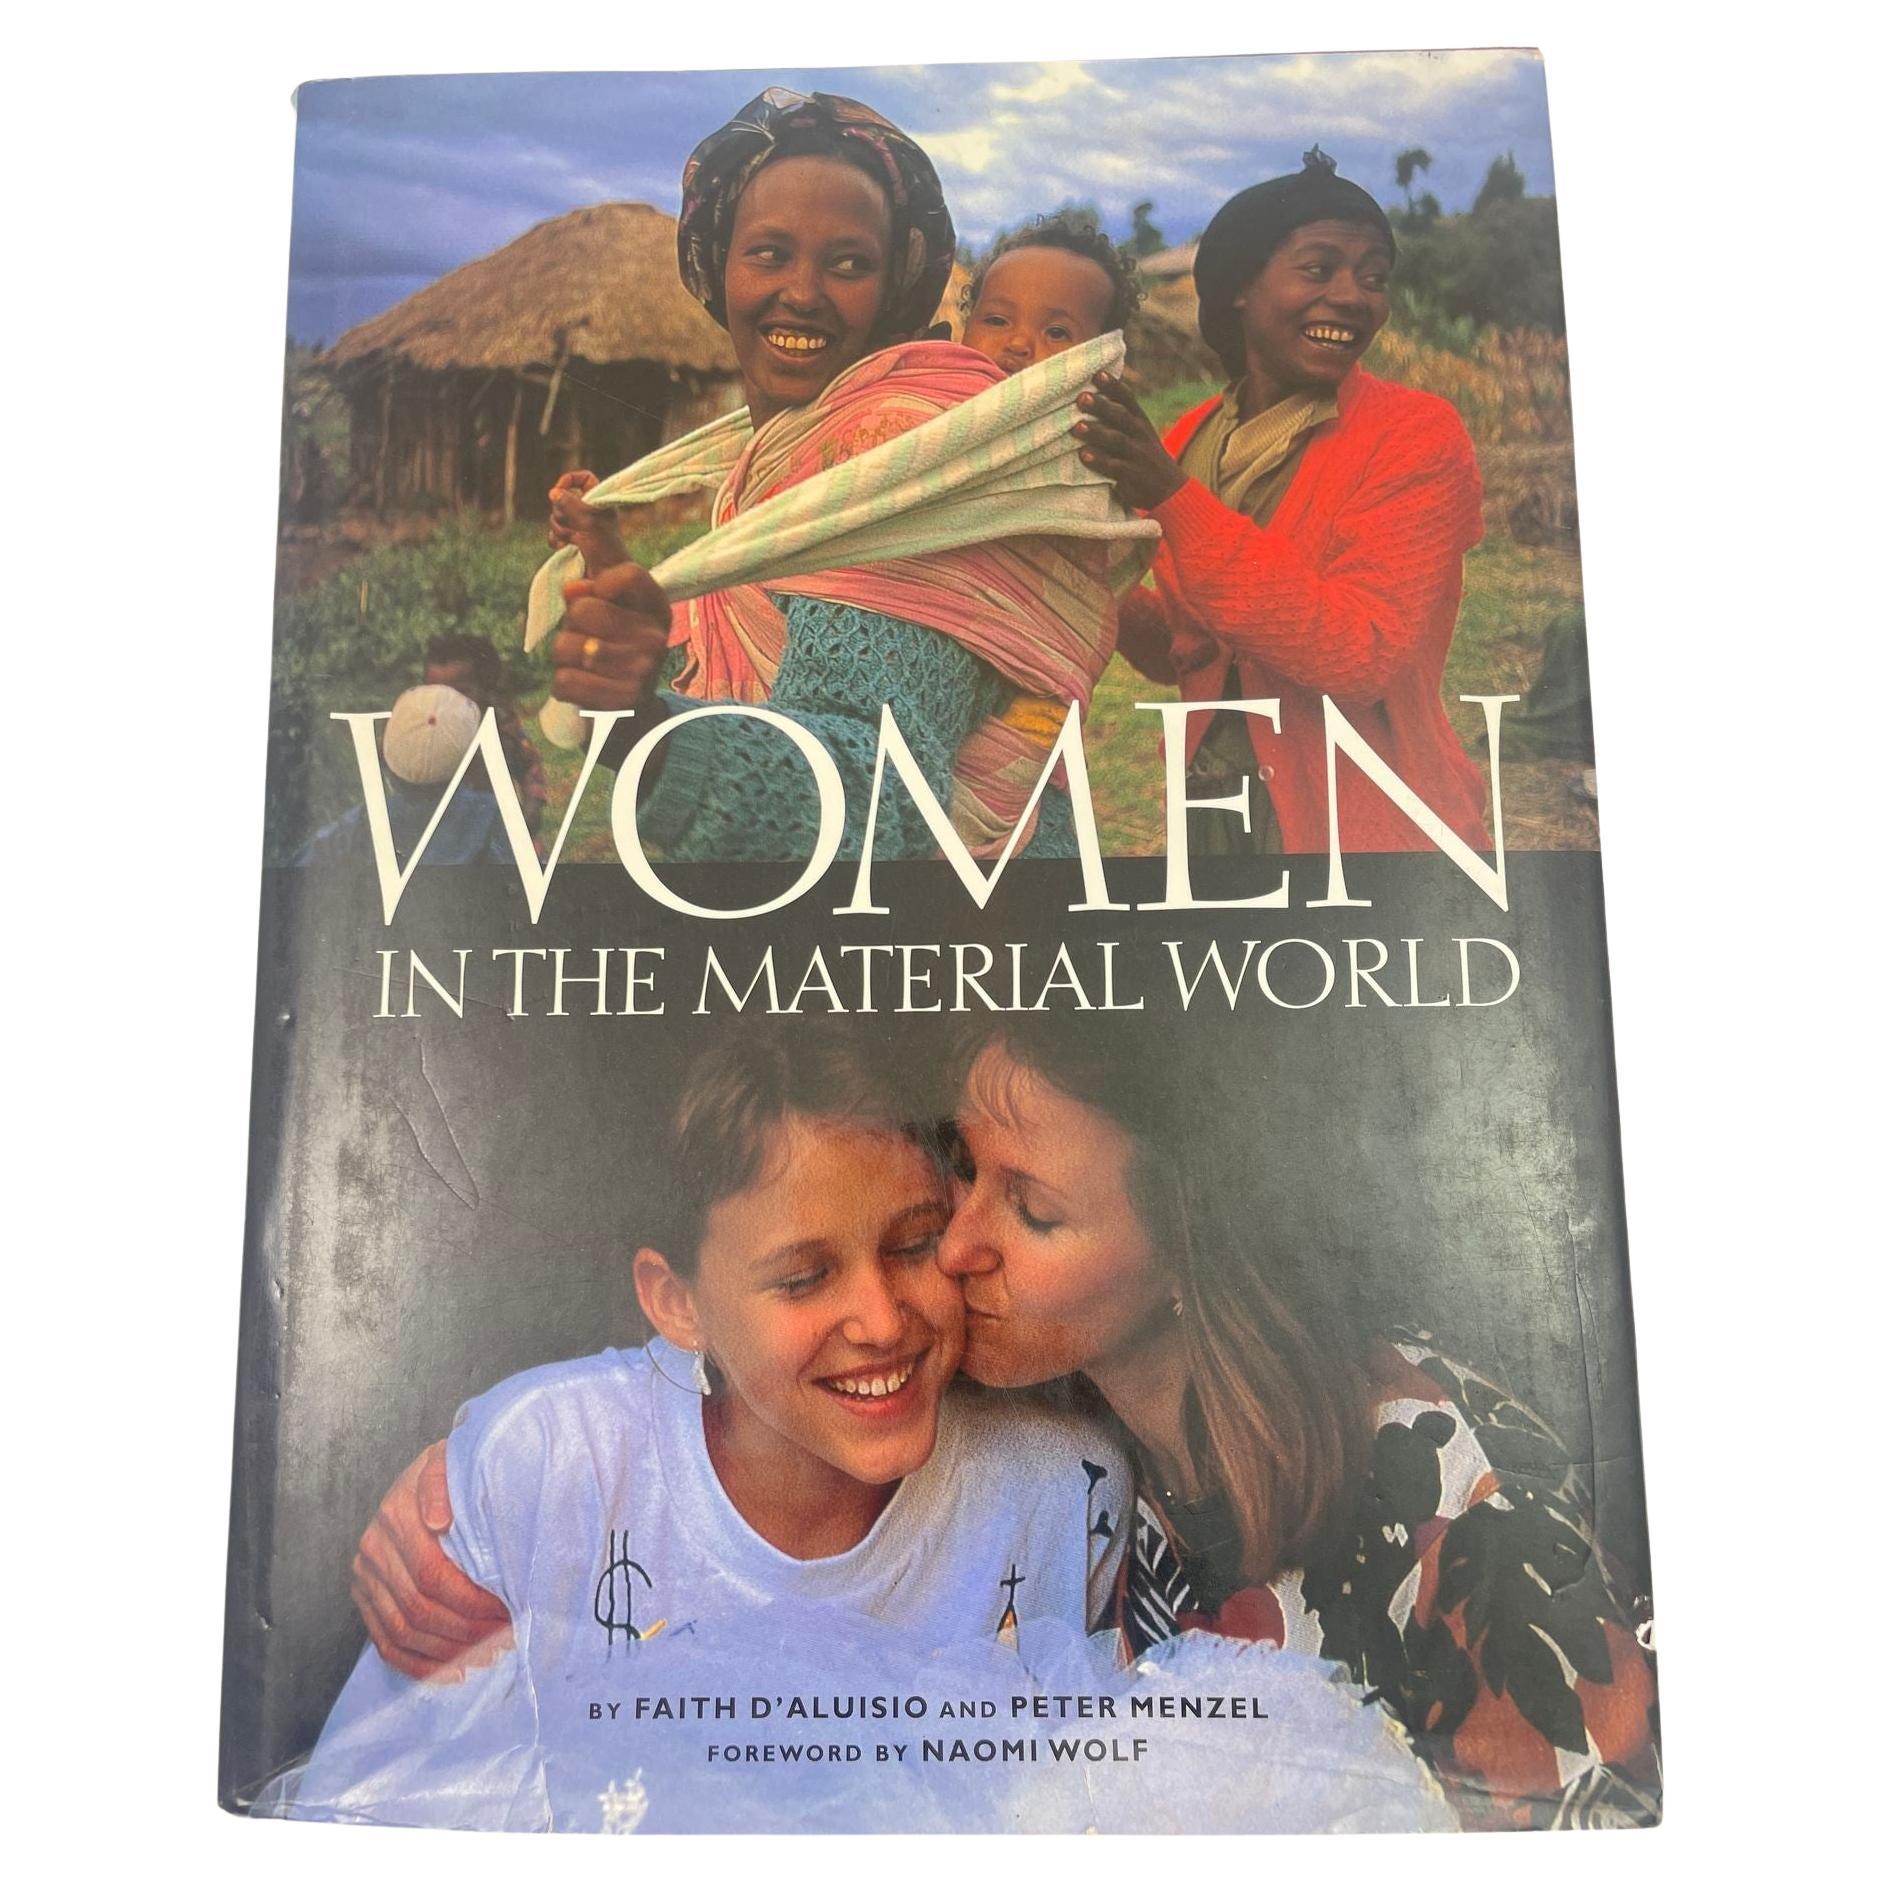 Women In the Material World by Faith D' Aluiso and Peter Menzel Hardcover Book For Sale